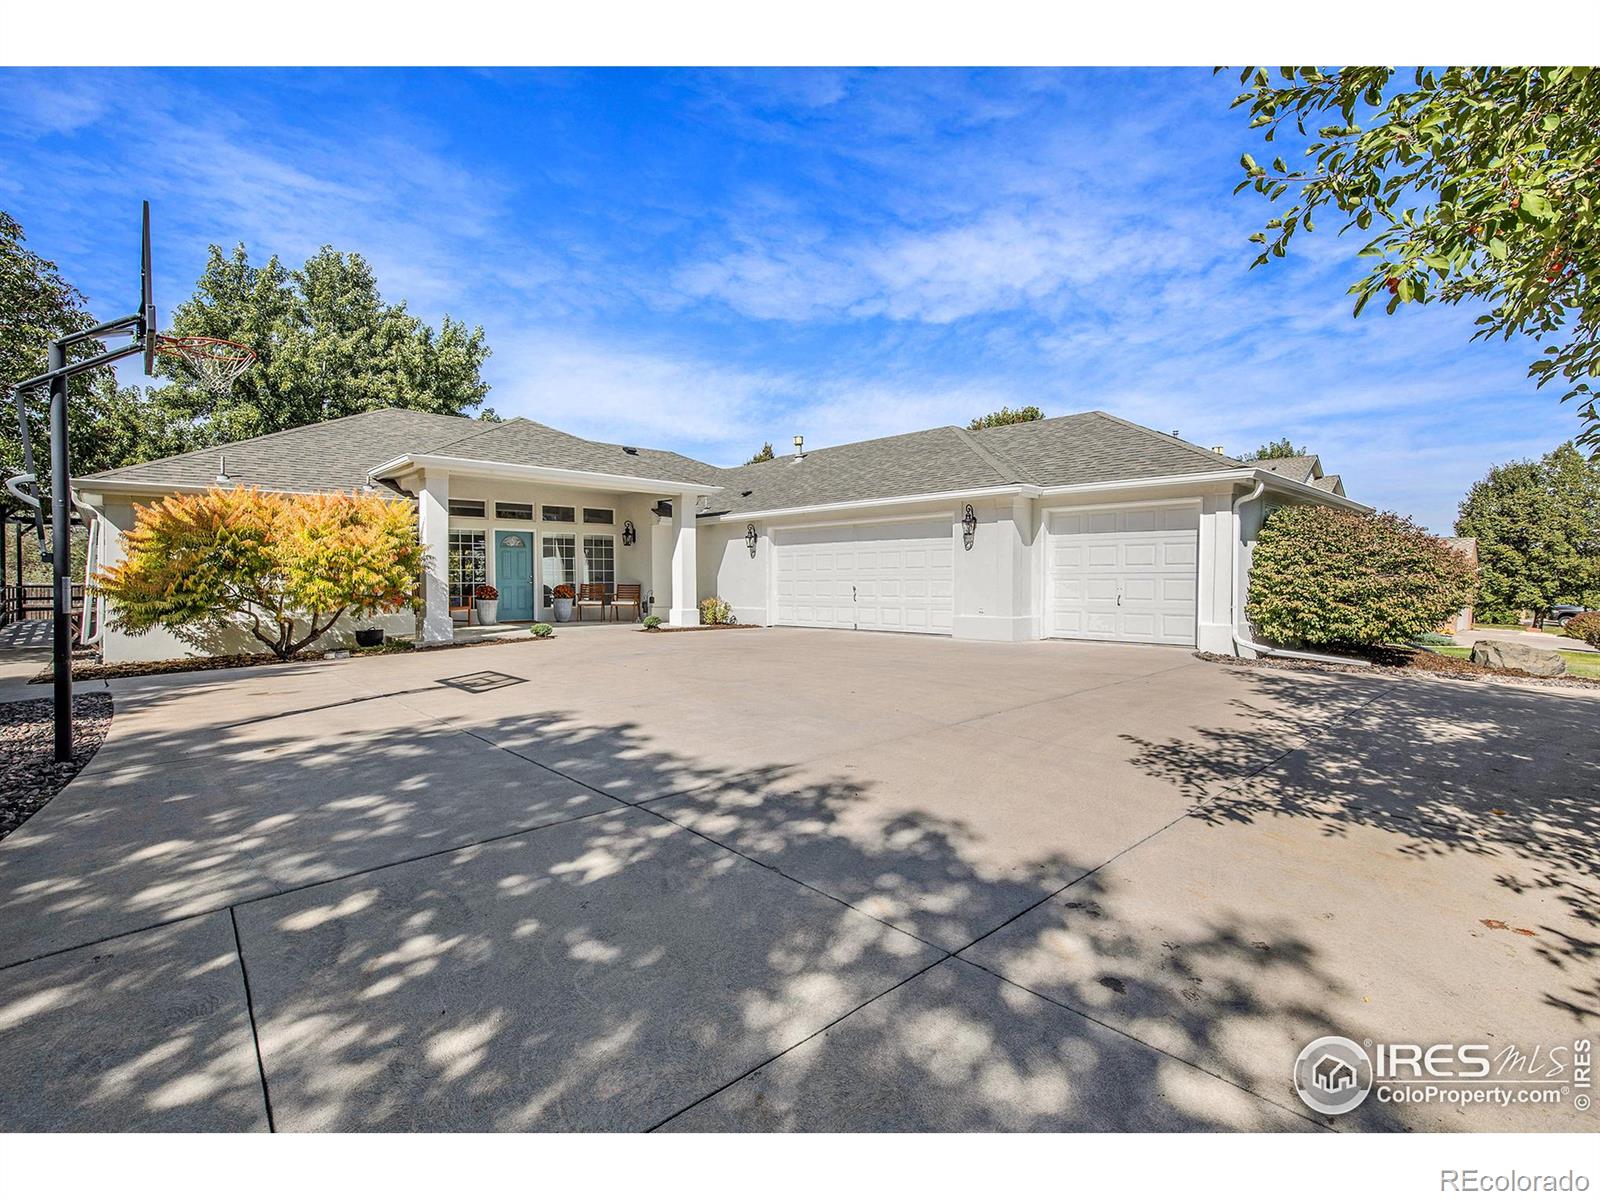 2113  65th Avenue, greeley MLS: 123456789997344 Beds: 5 Baths: 4 Price: $675,000